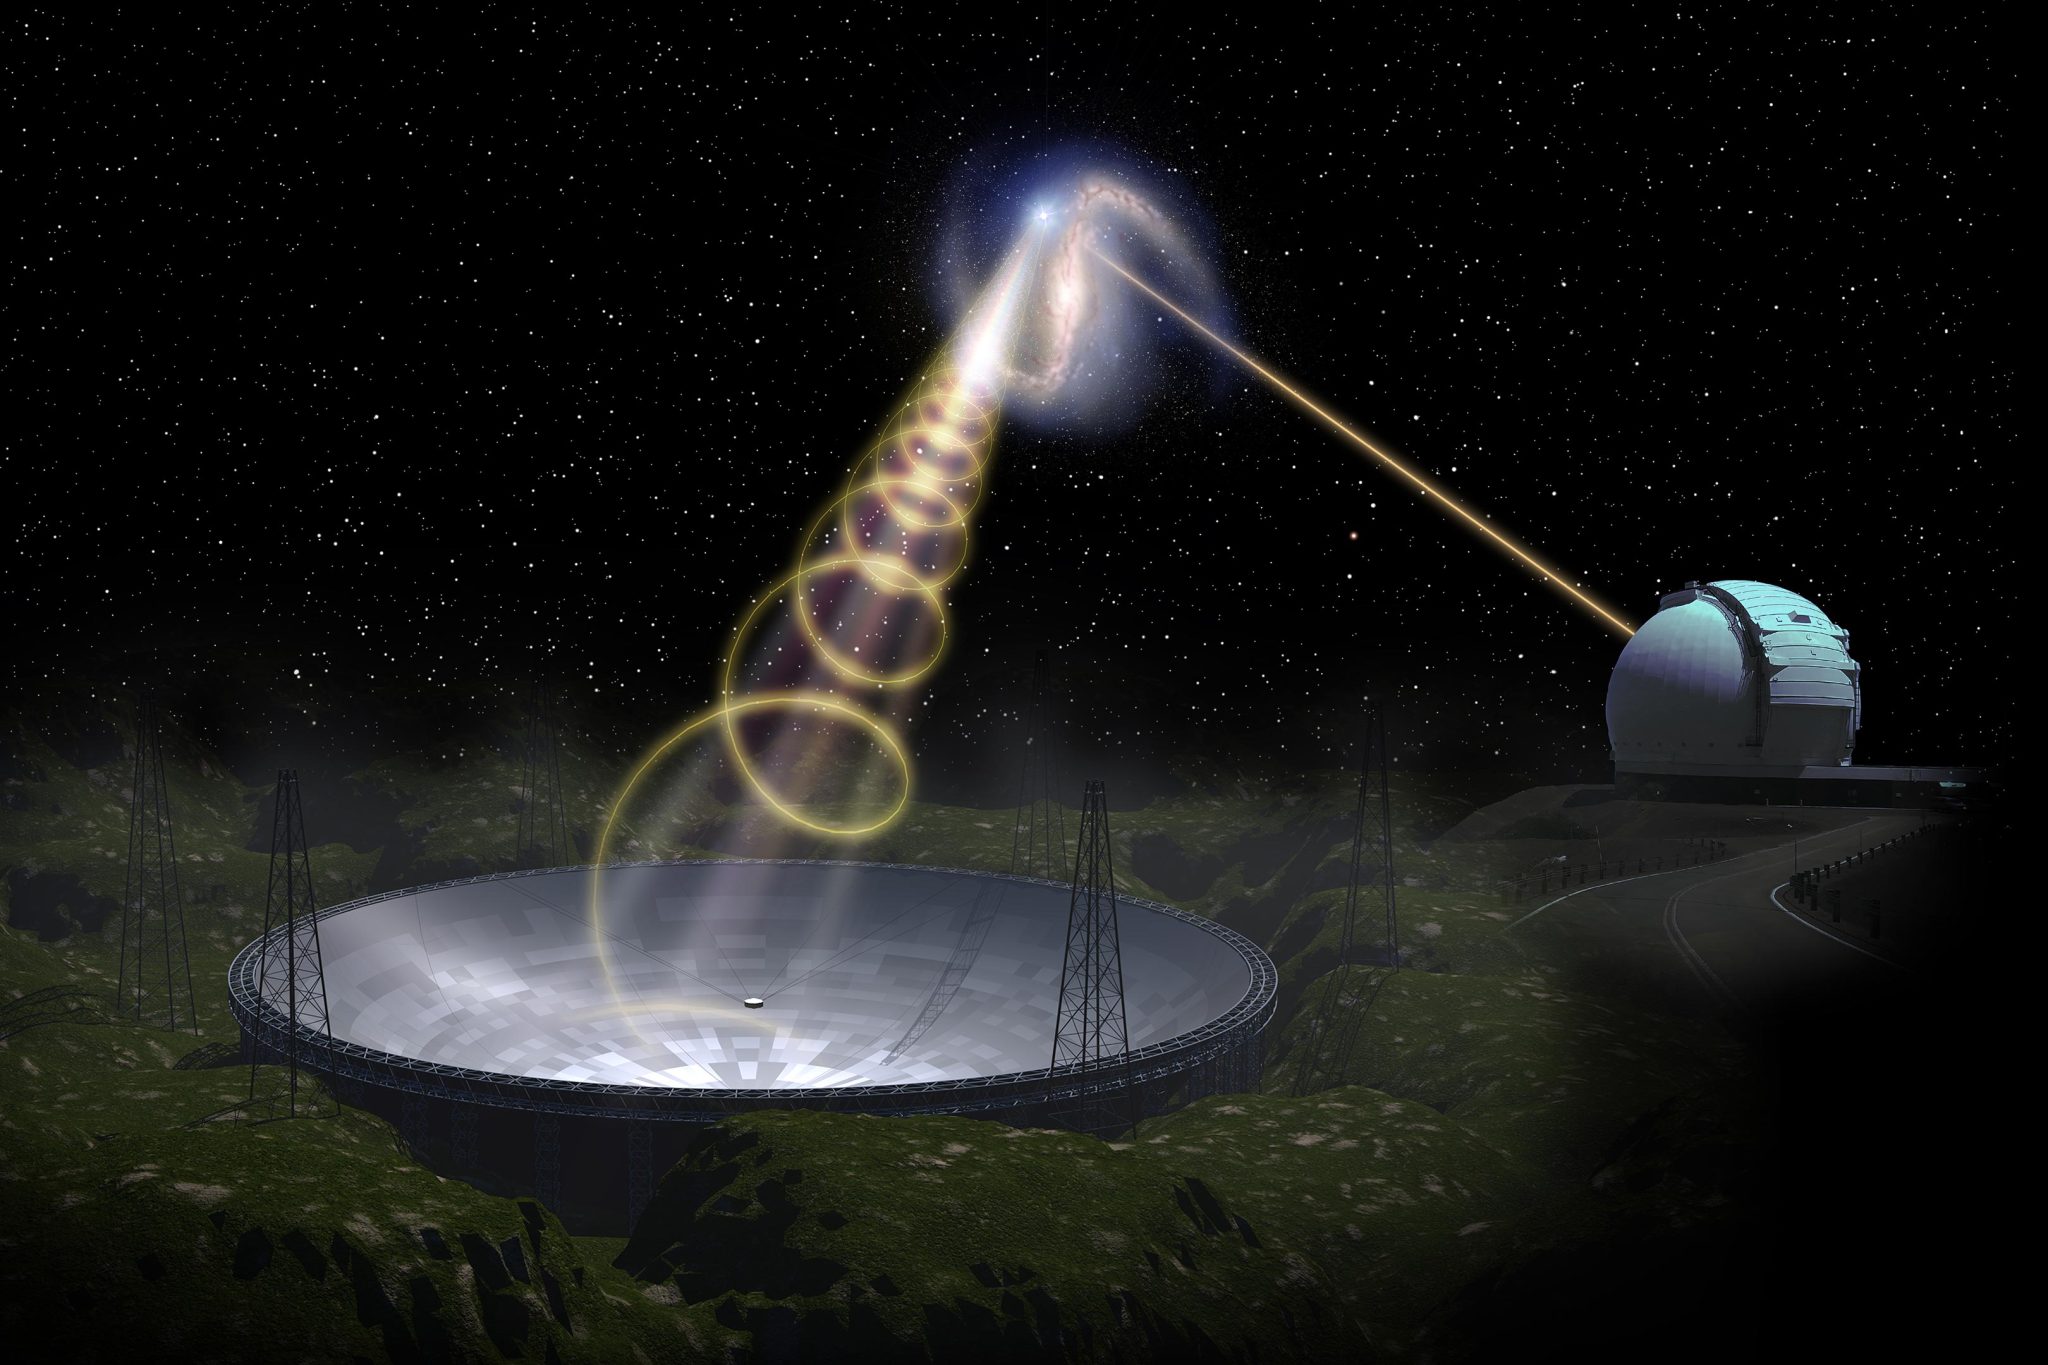 Surprising New Features of Mysterious Fast Radio Bursts Defy Current Understanding